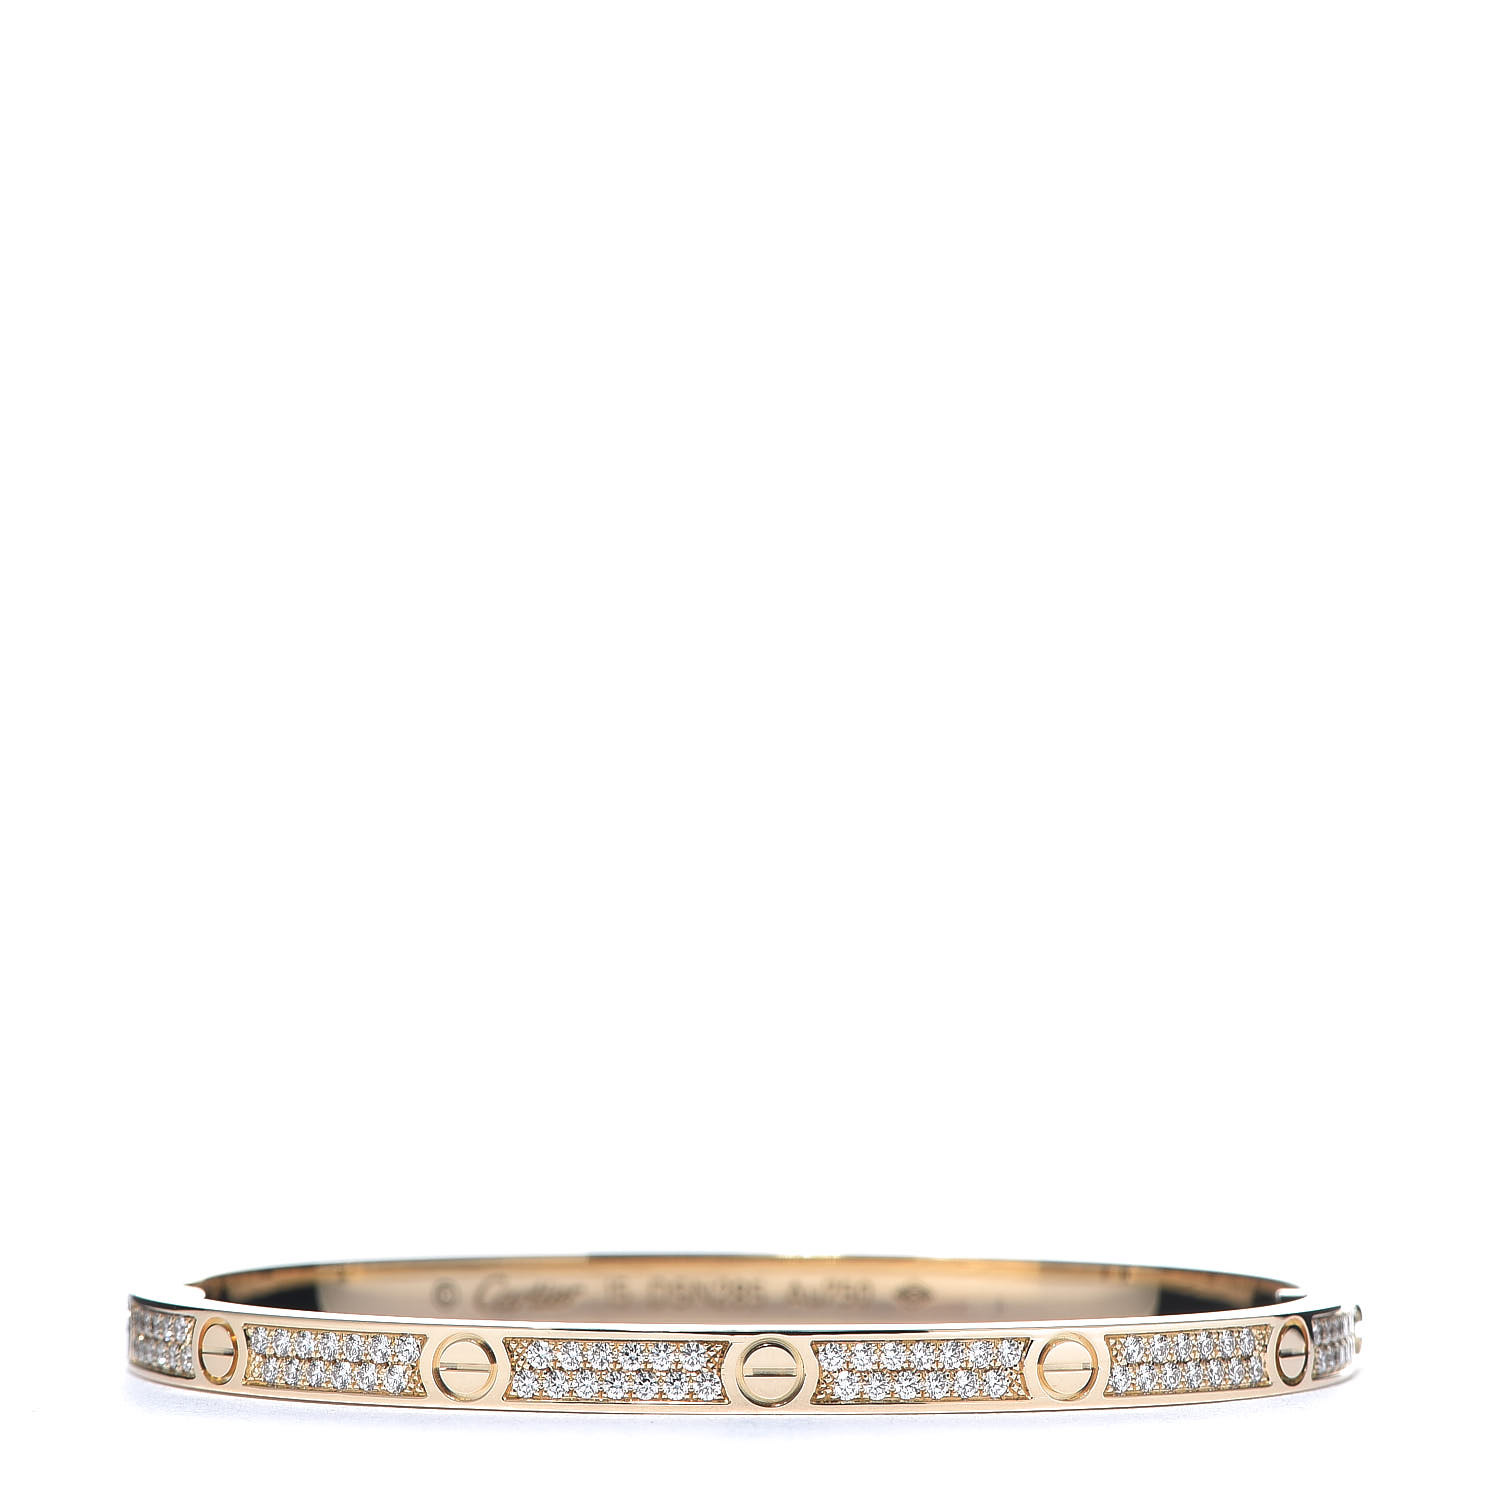 Cartier 18k Yellow Gold Pave Diamond Small Love Bracelet 15 532570,Picture Of A Rational Number